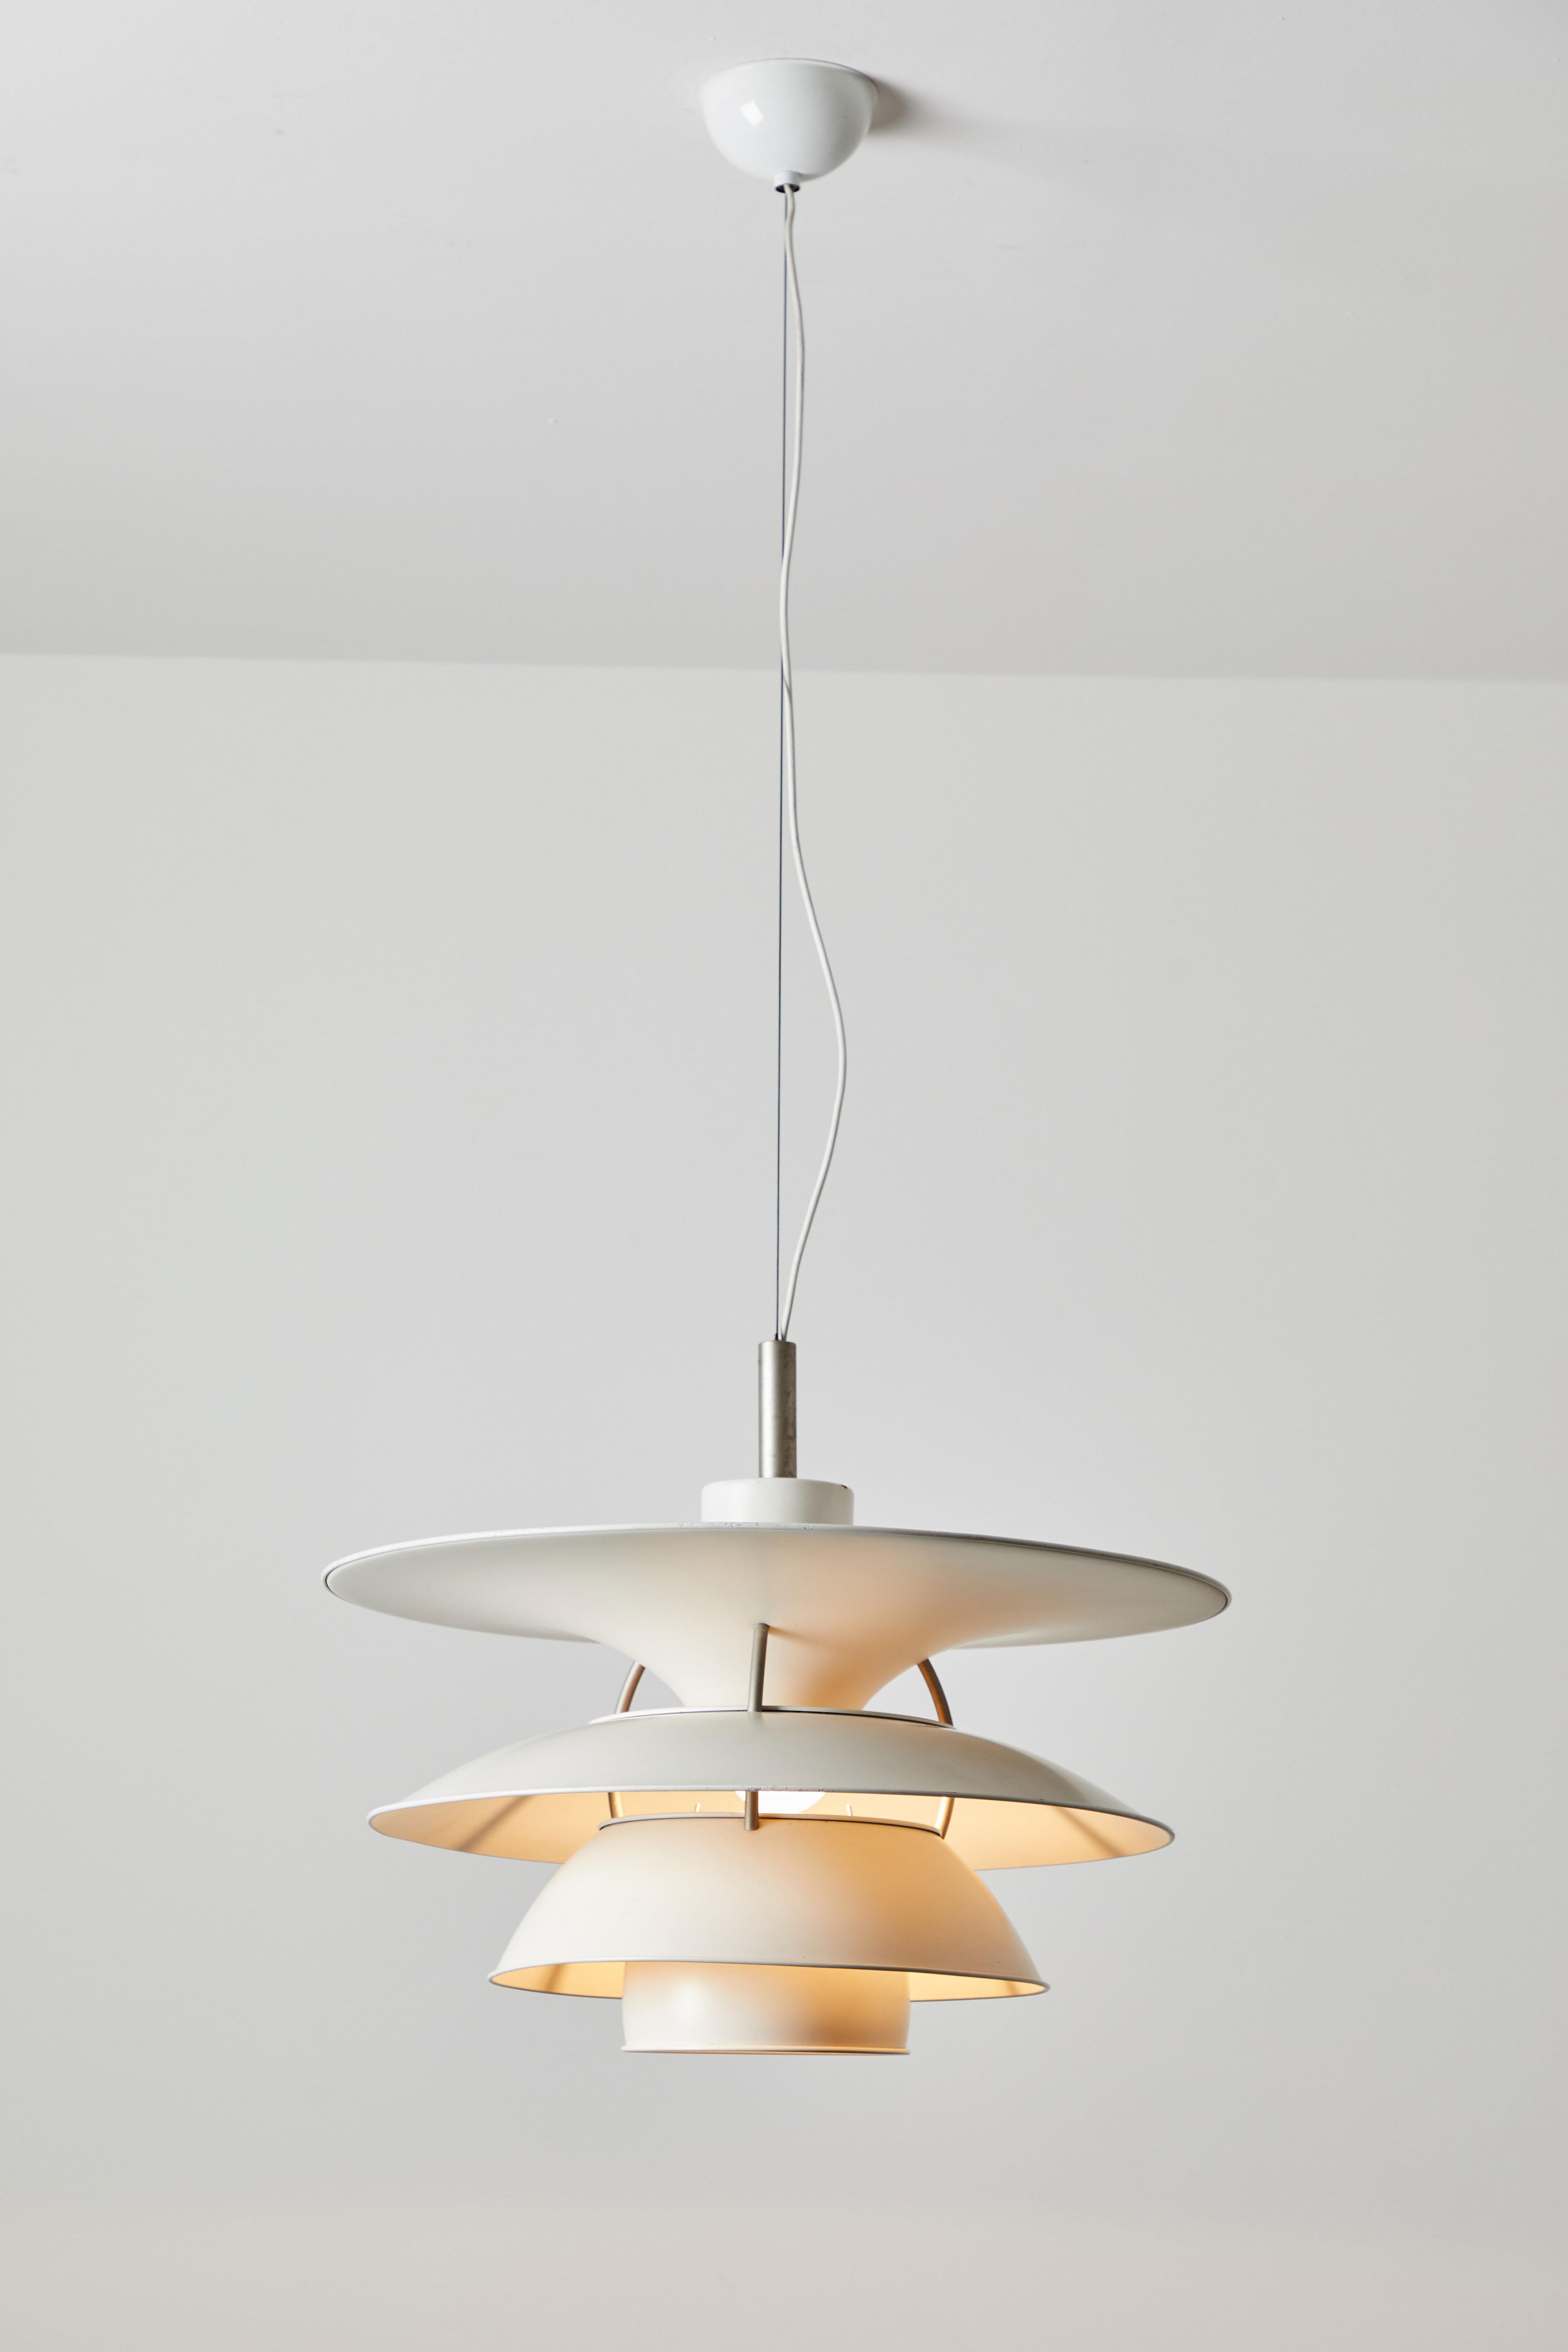 Large late model Charlottenborg PH 6- 6/12 pendant light by Poul Henningsen for Louis Poulsen. Designed and manufactured in Denmark, circa 1960s. Enameled metal. Rewired for US junction boxes. Takes one E27100w maximum bulb. Poul Henningsen designed